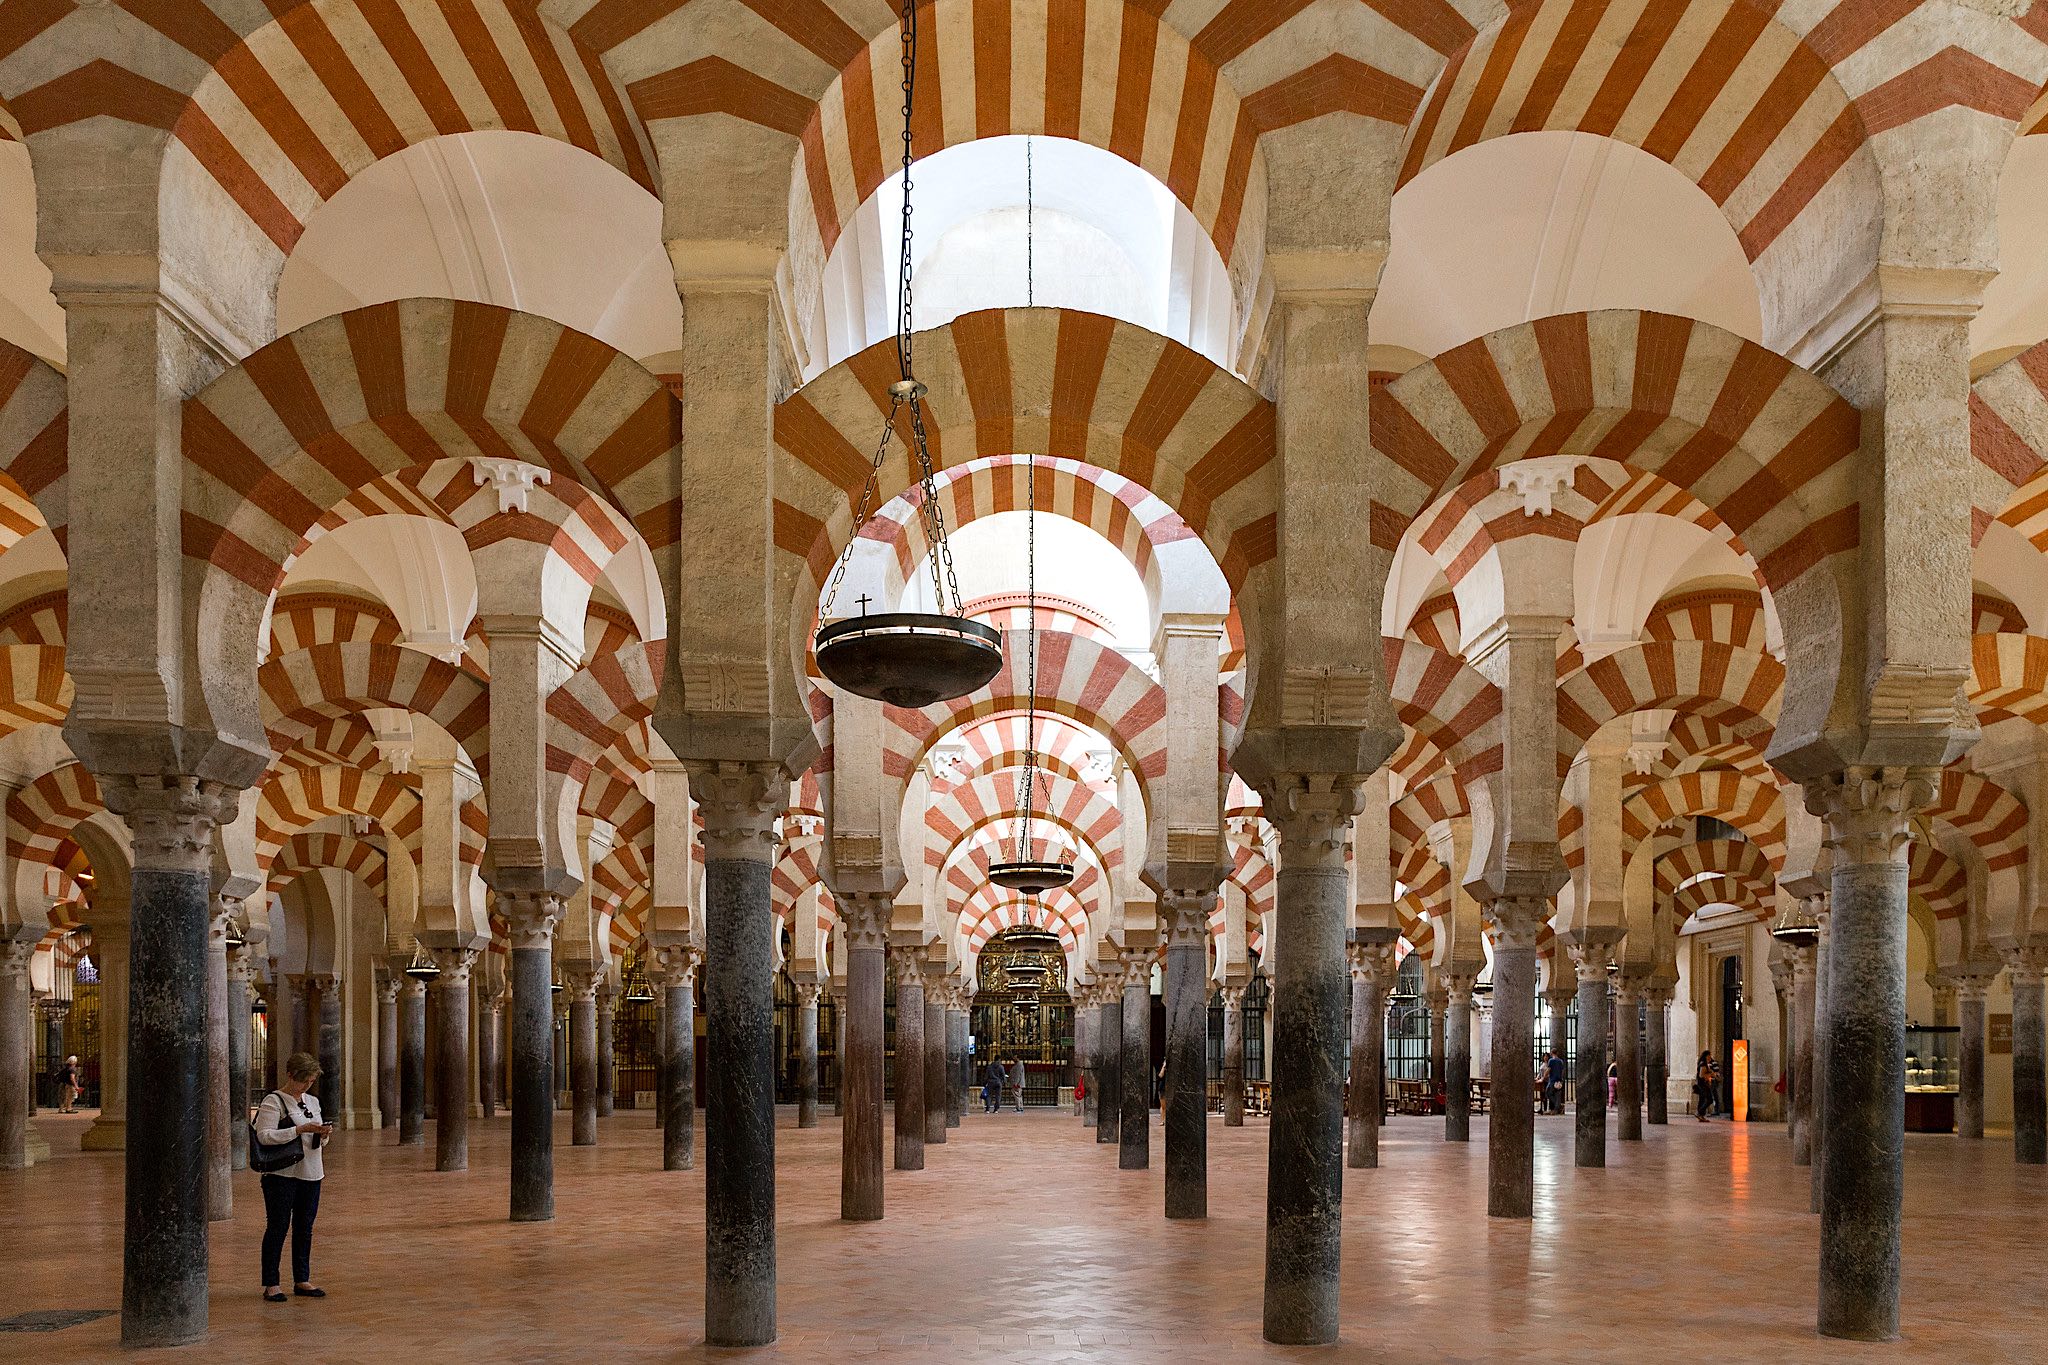 The Great Mosque of Córdoba